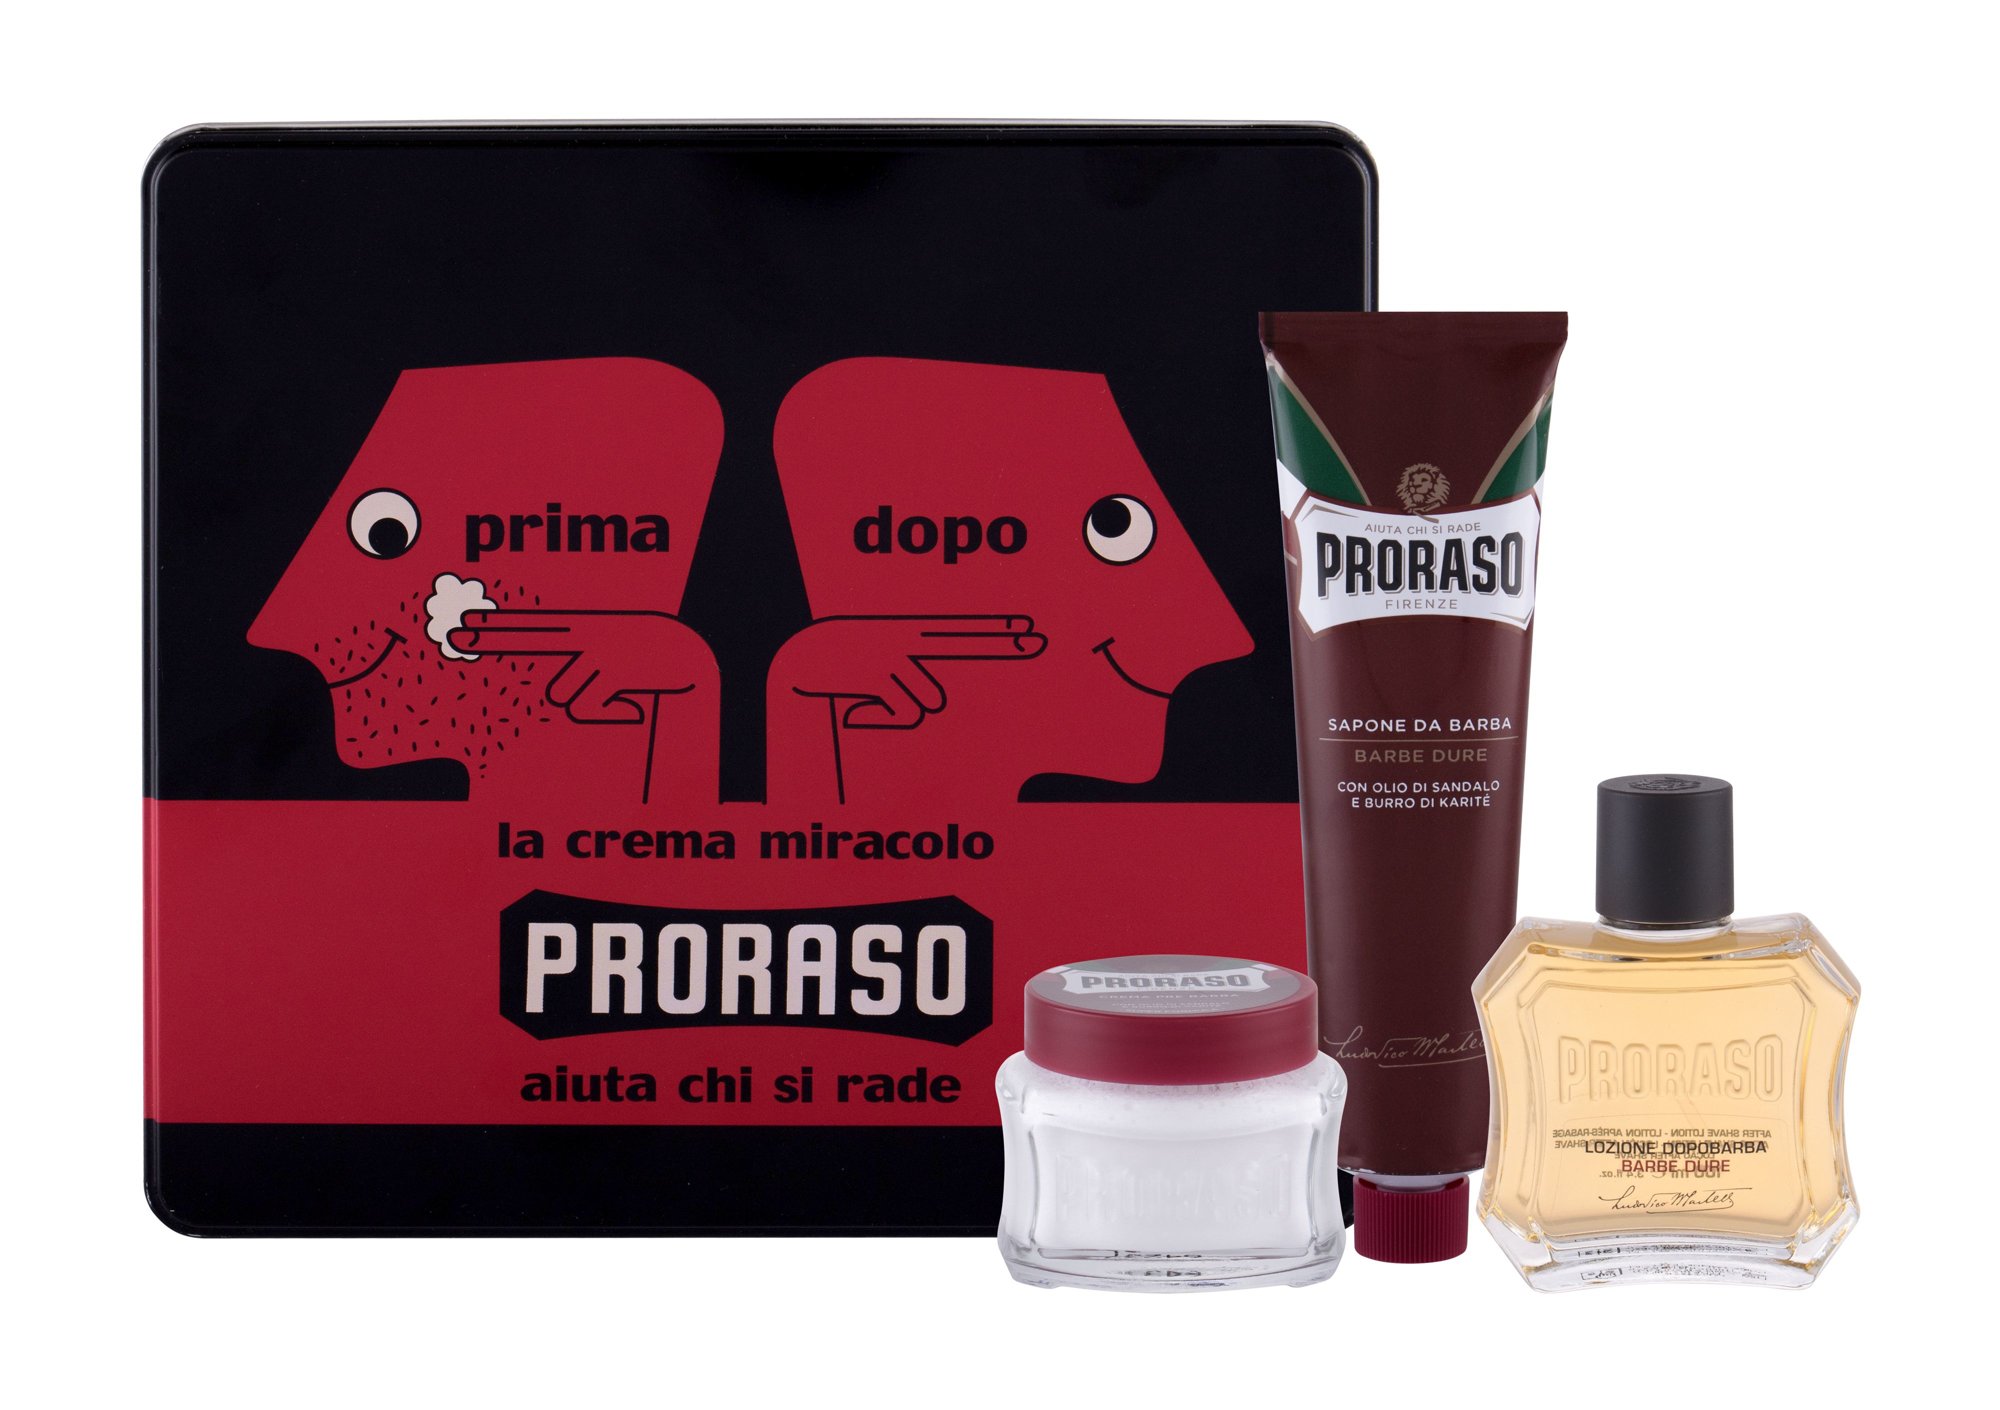 PRORASO Red After Shave Lotion vanduo po skutimosi